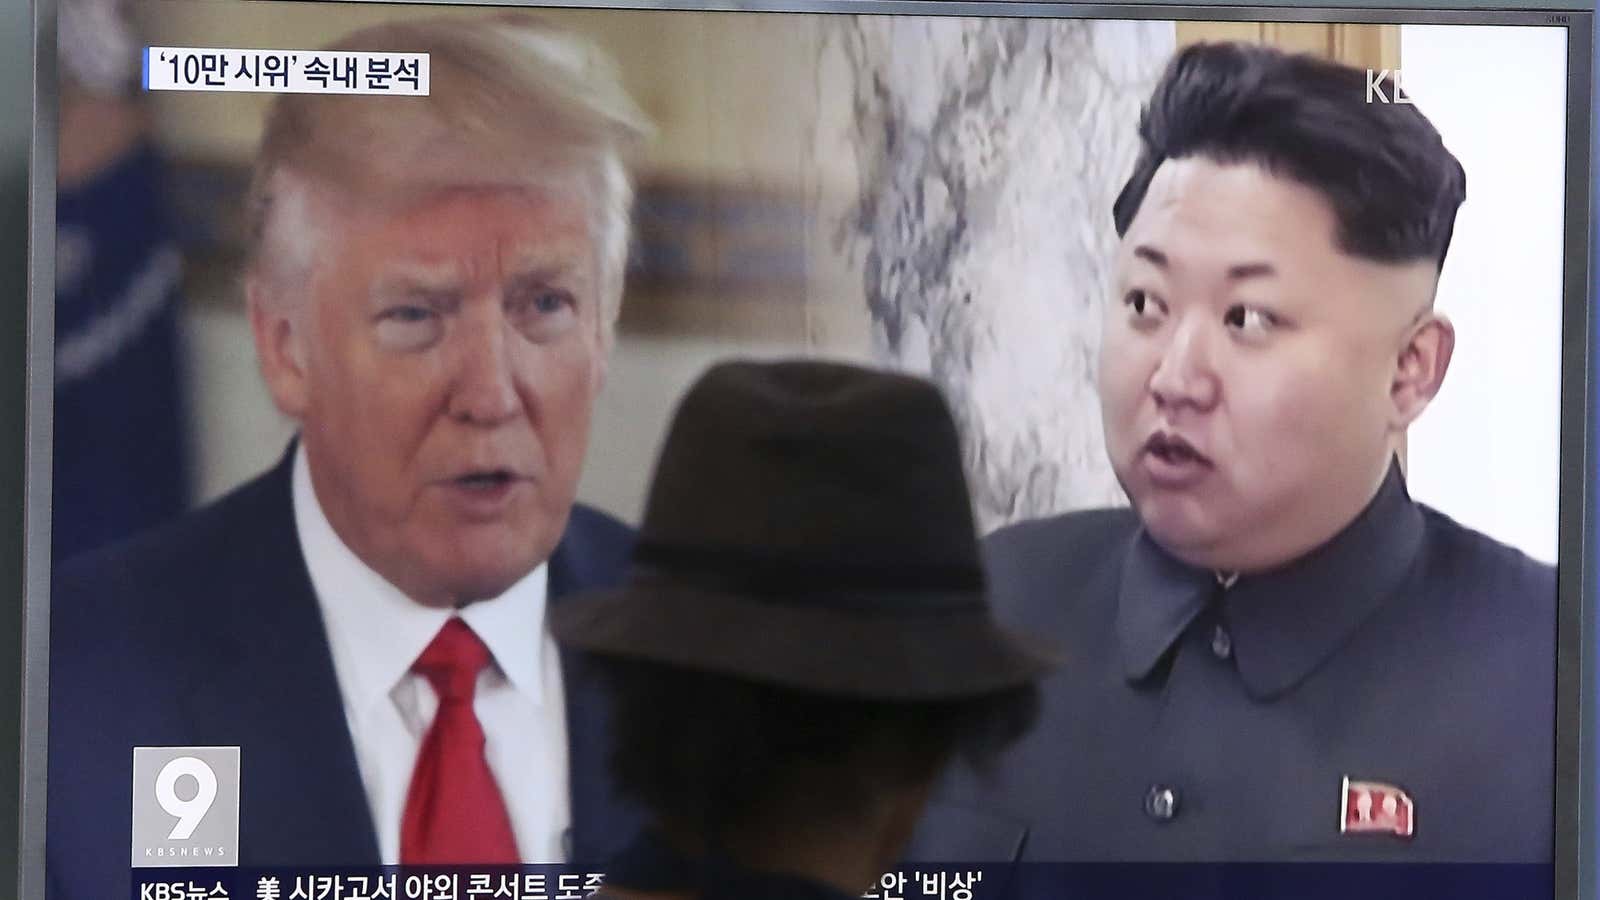 Trump and Kim Jong Un have been publicly facing off over the nuclear threat.